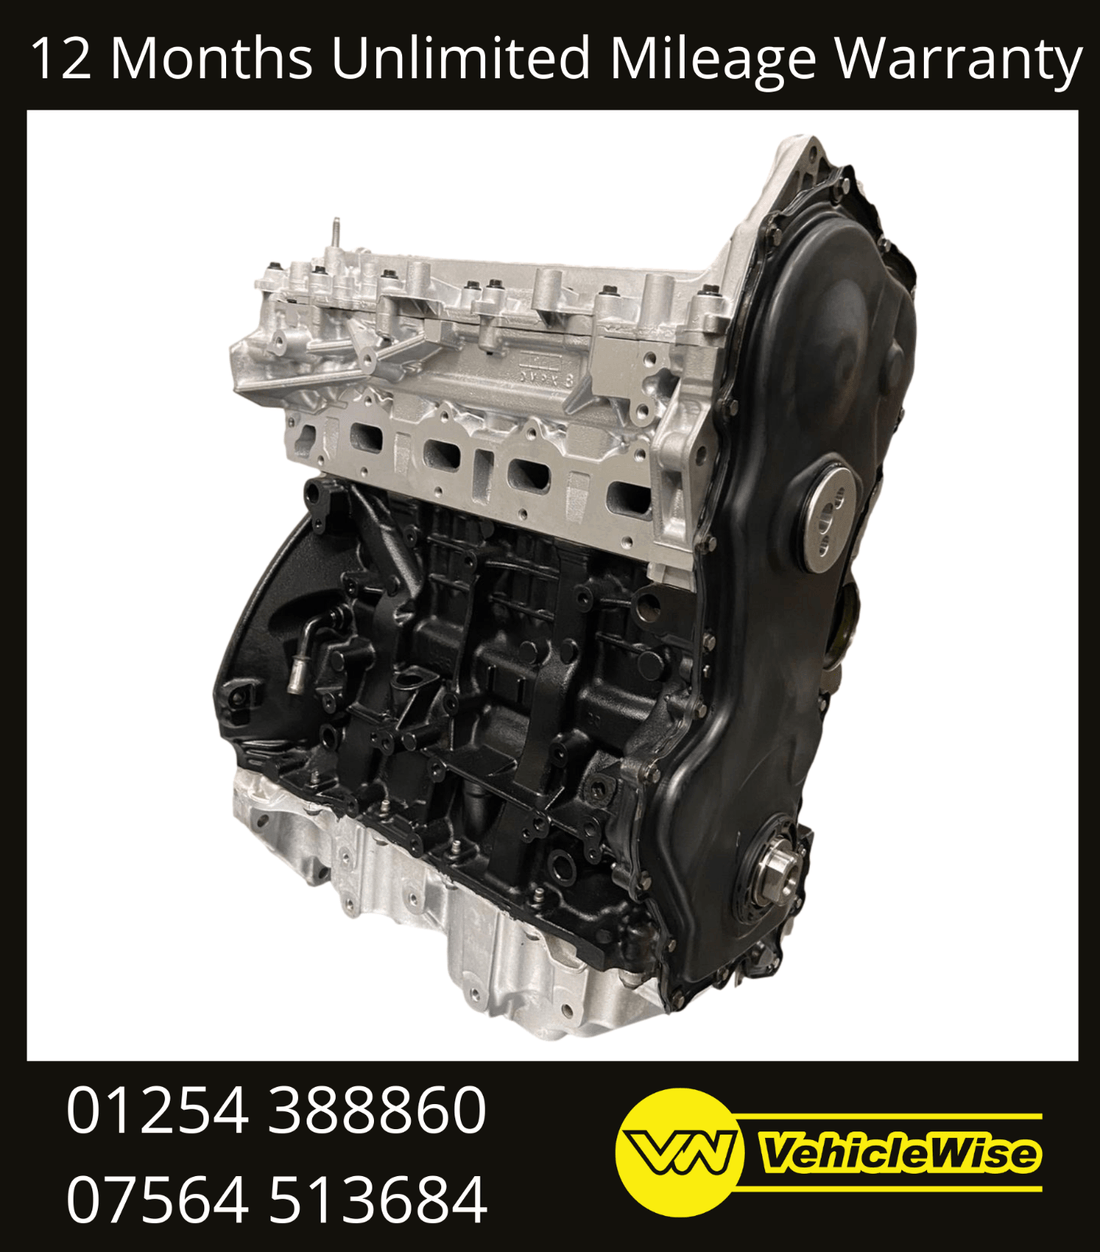 Reconditioned Renault Trafic 2.0 dci Engine - M9R786